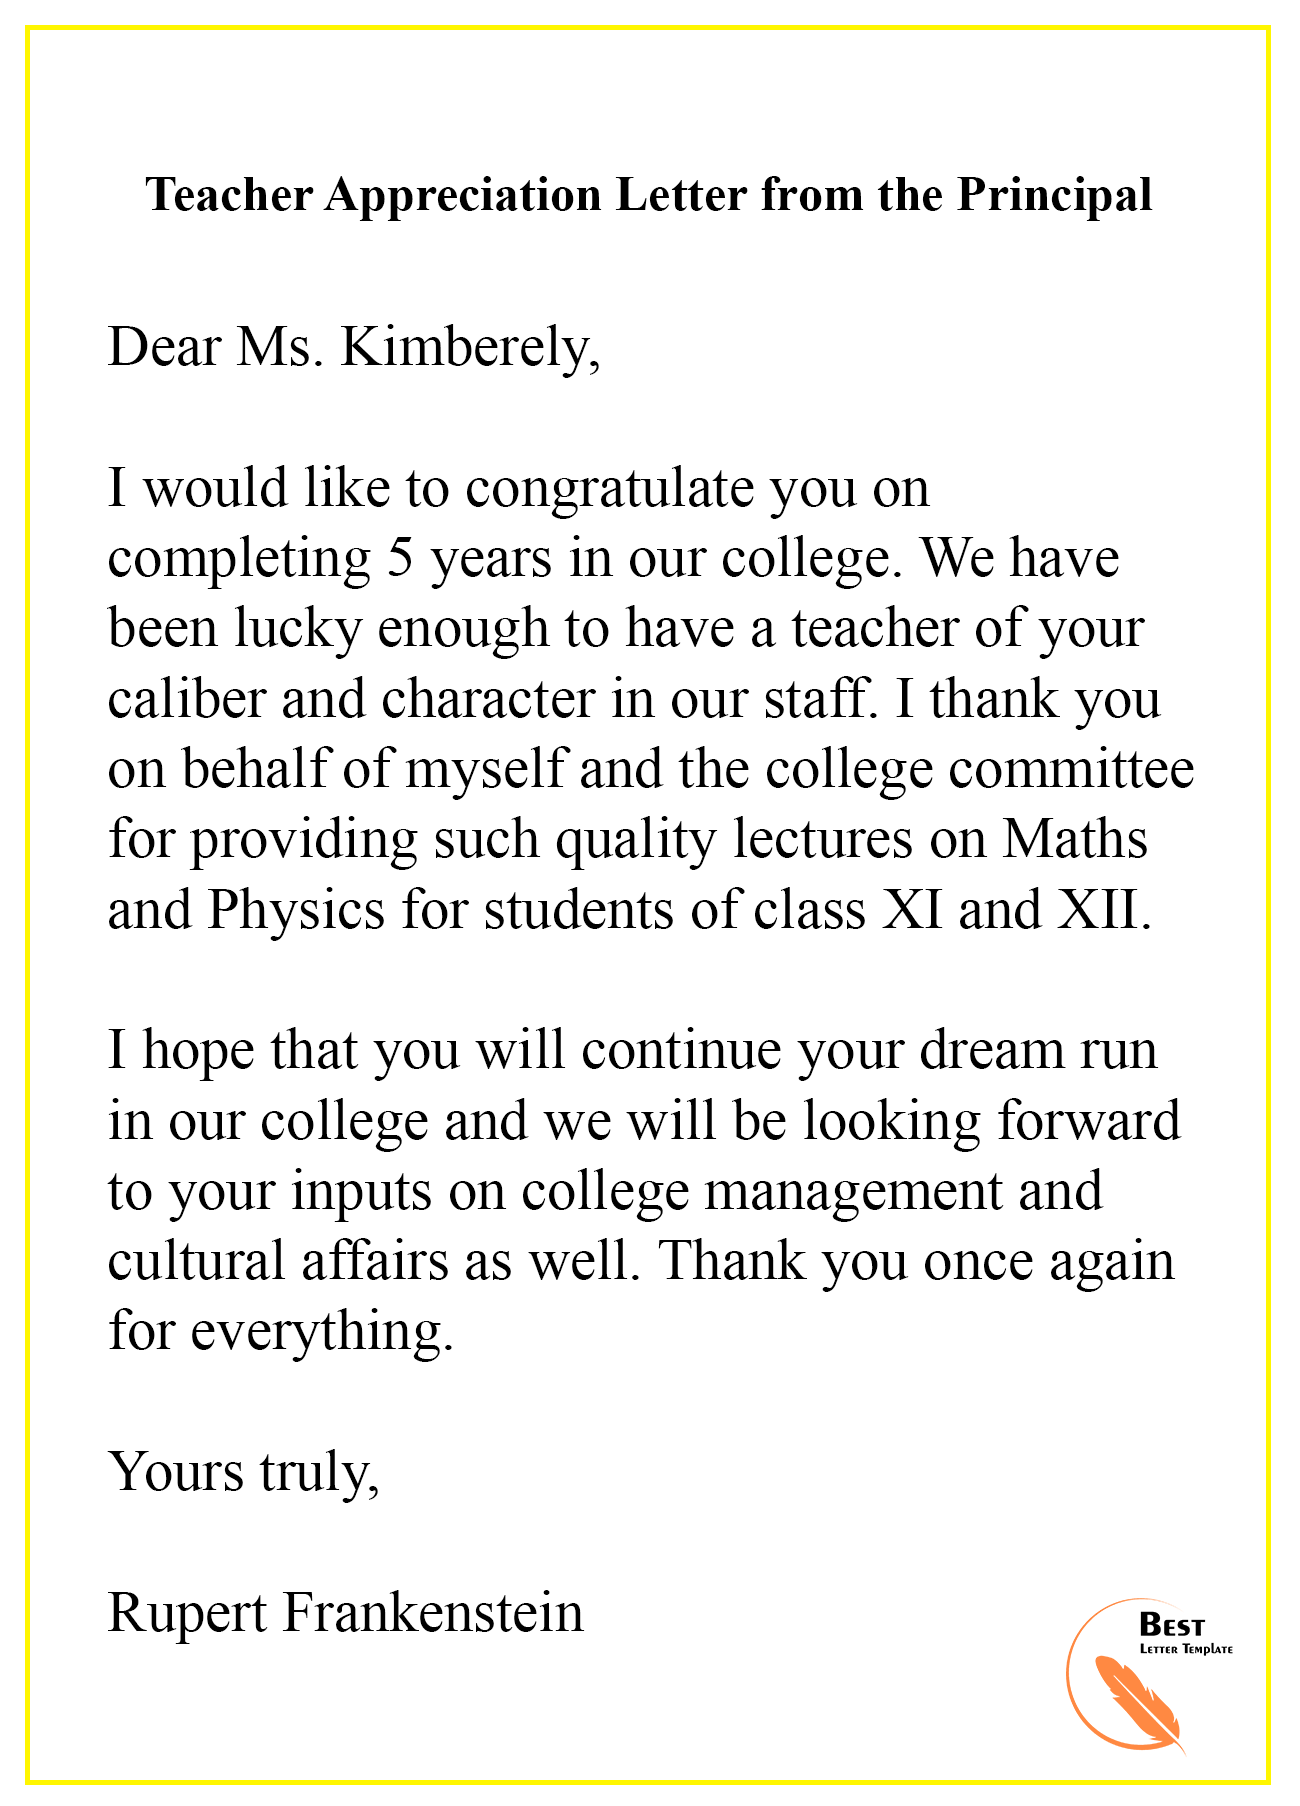 teacher-appreciation-letter-from-the-principal-best-letter-template